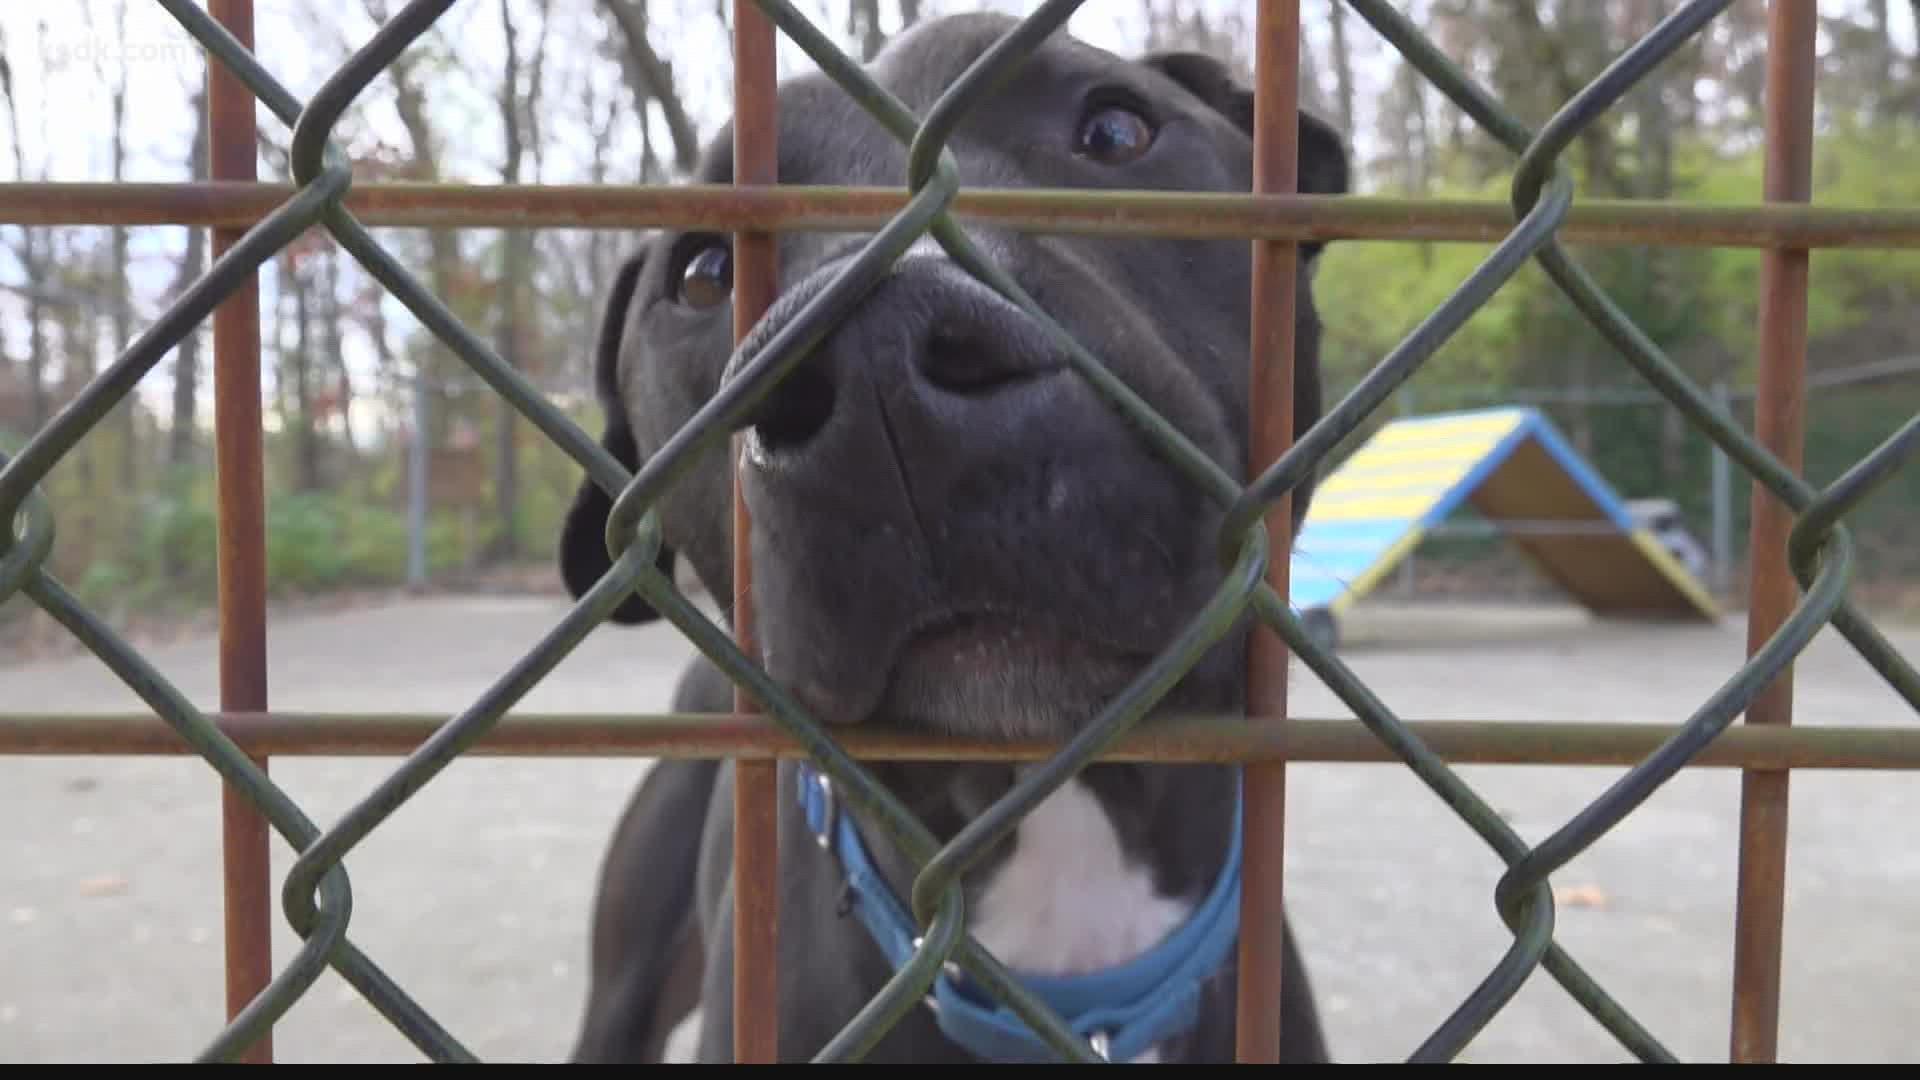 Shelter sees high intake of pandemic pets, low adoption rates 